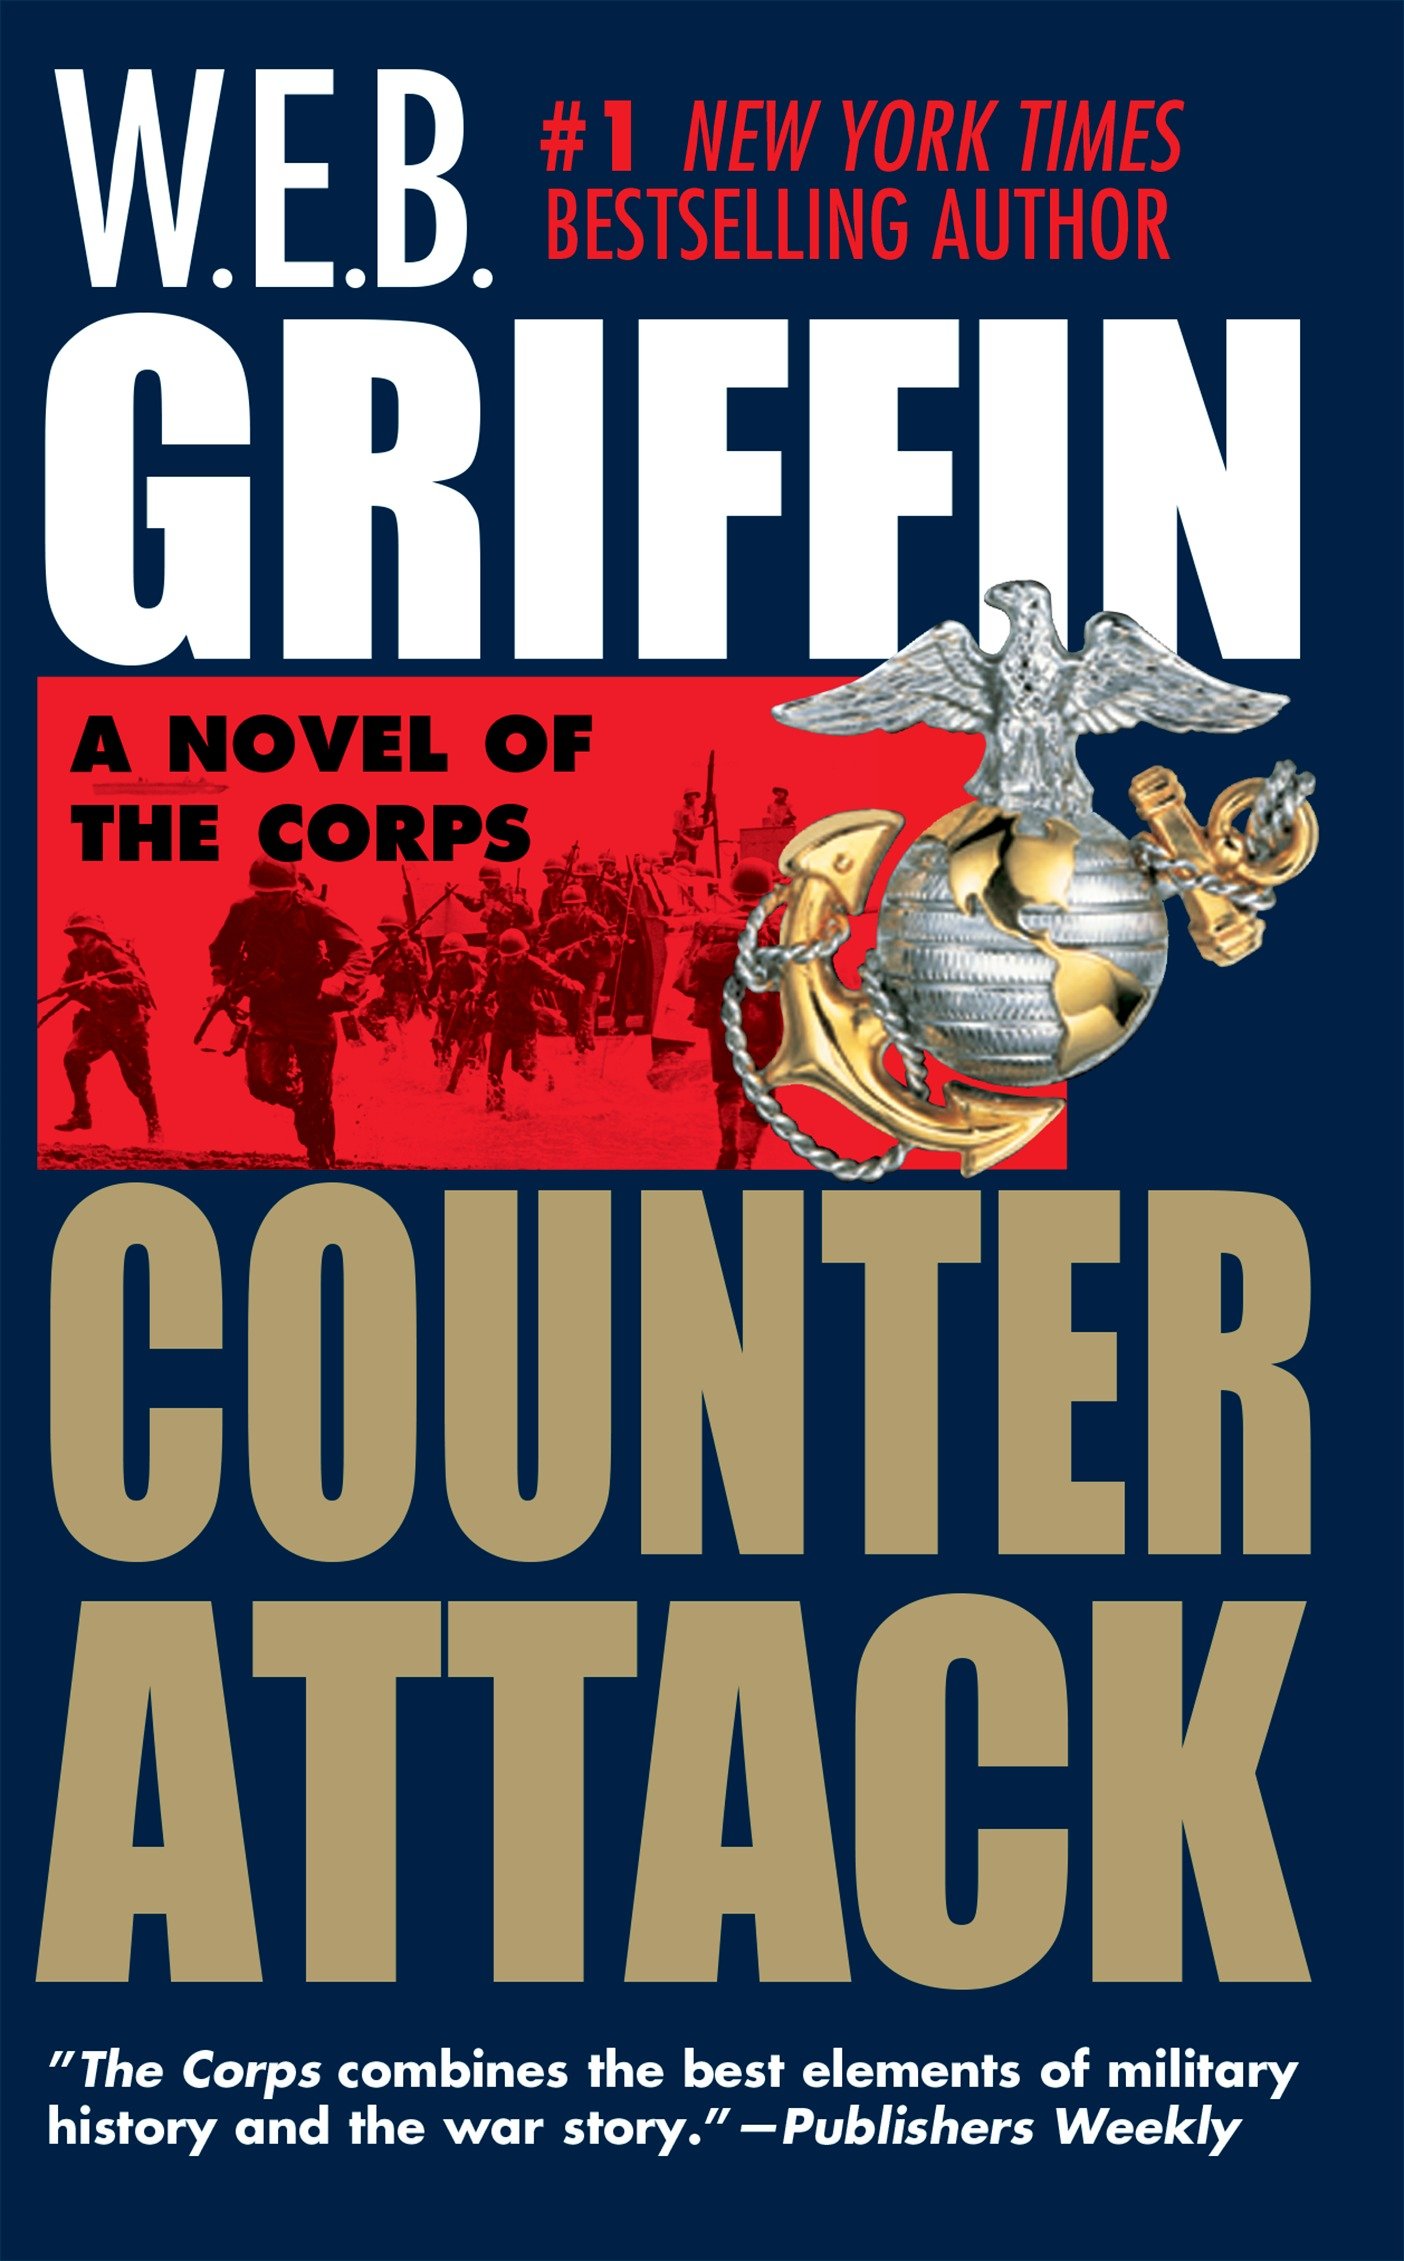 Corps: Counterattack (Series #3) (Paperback) - image 1 of 1